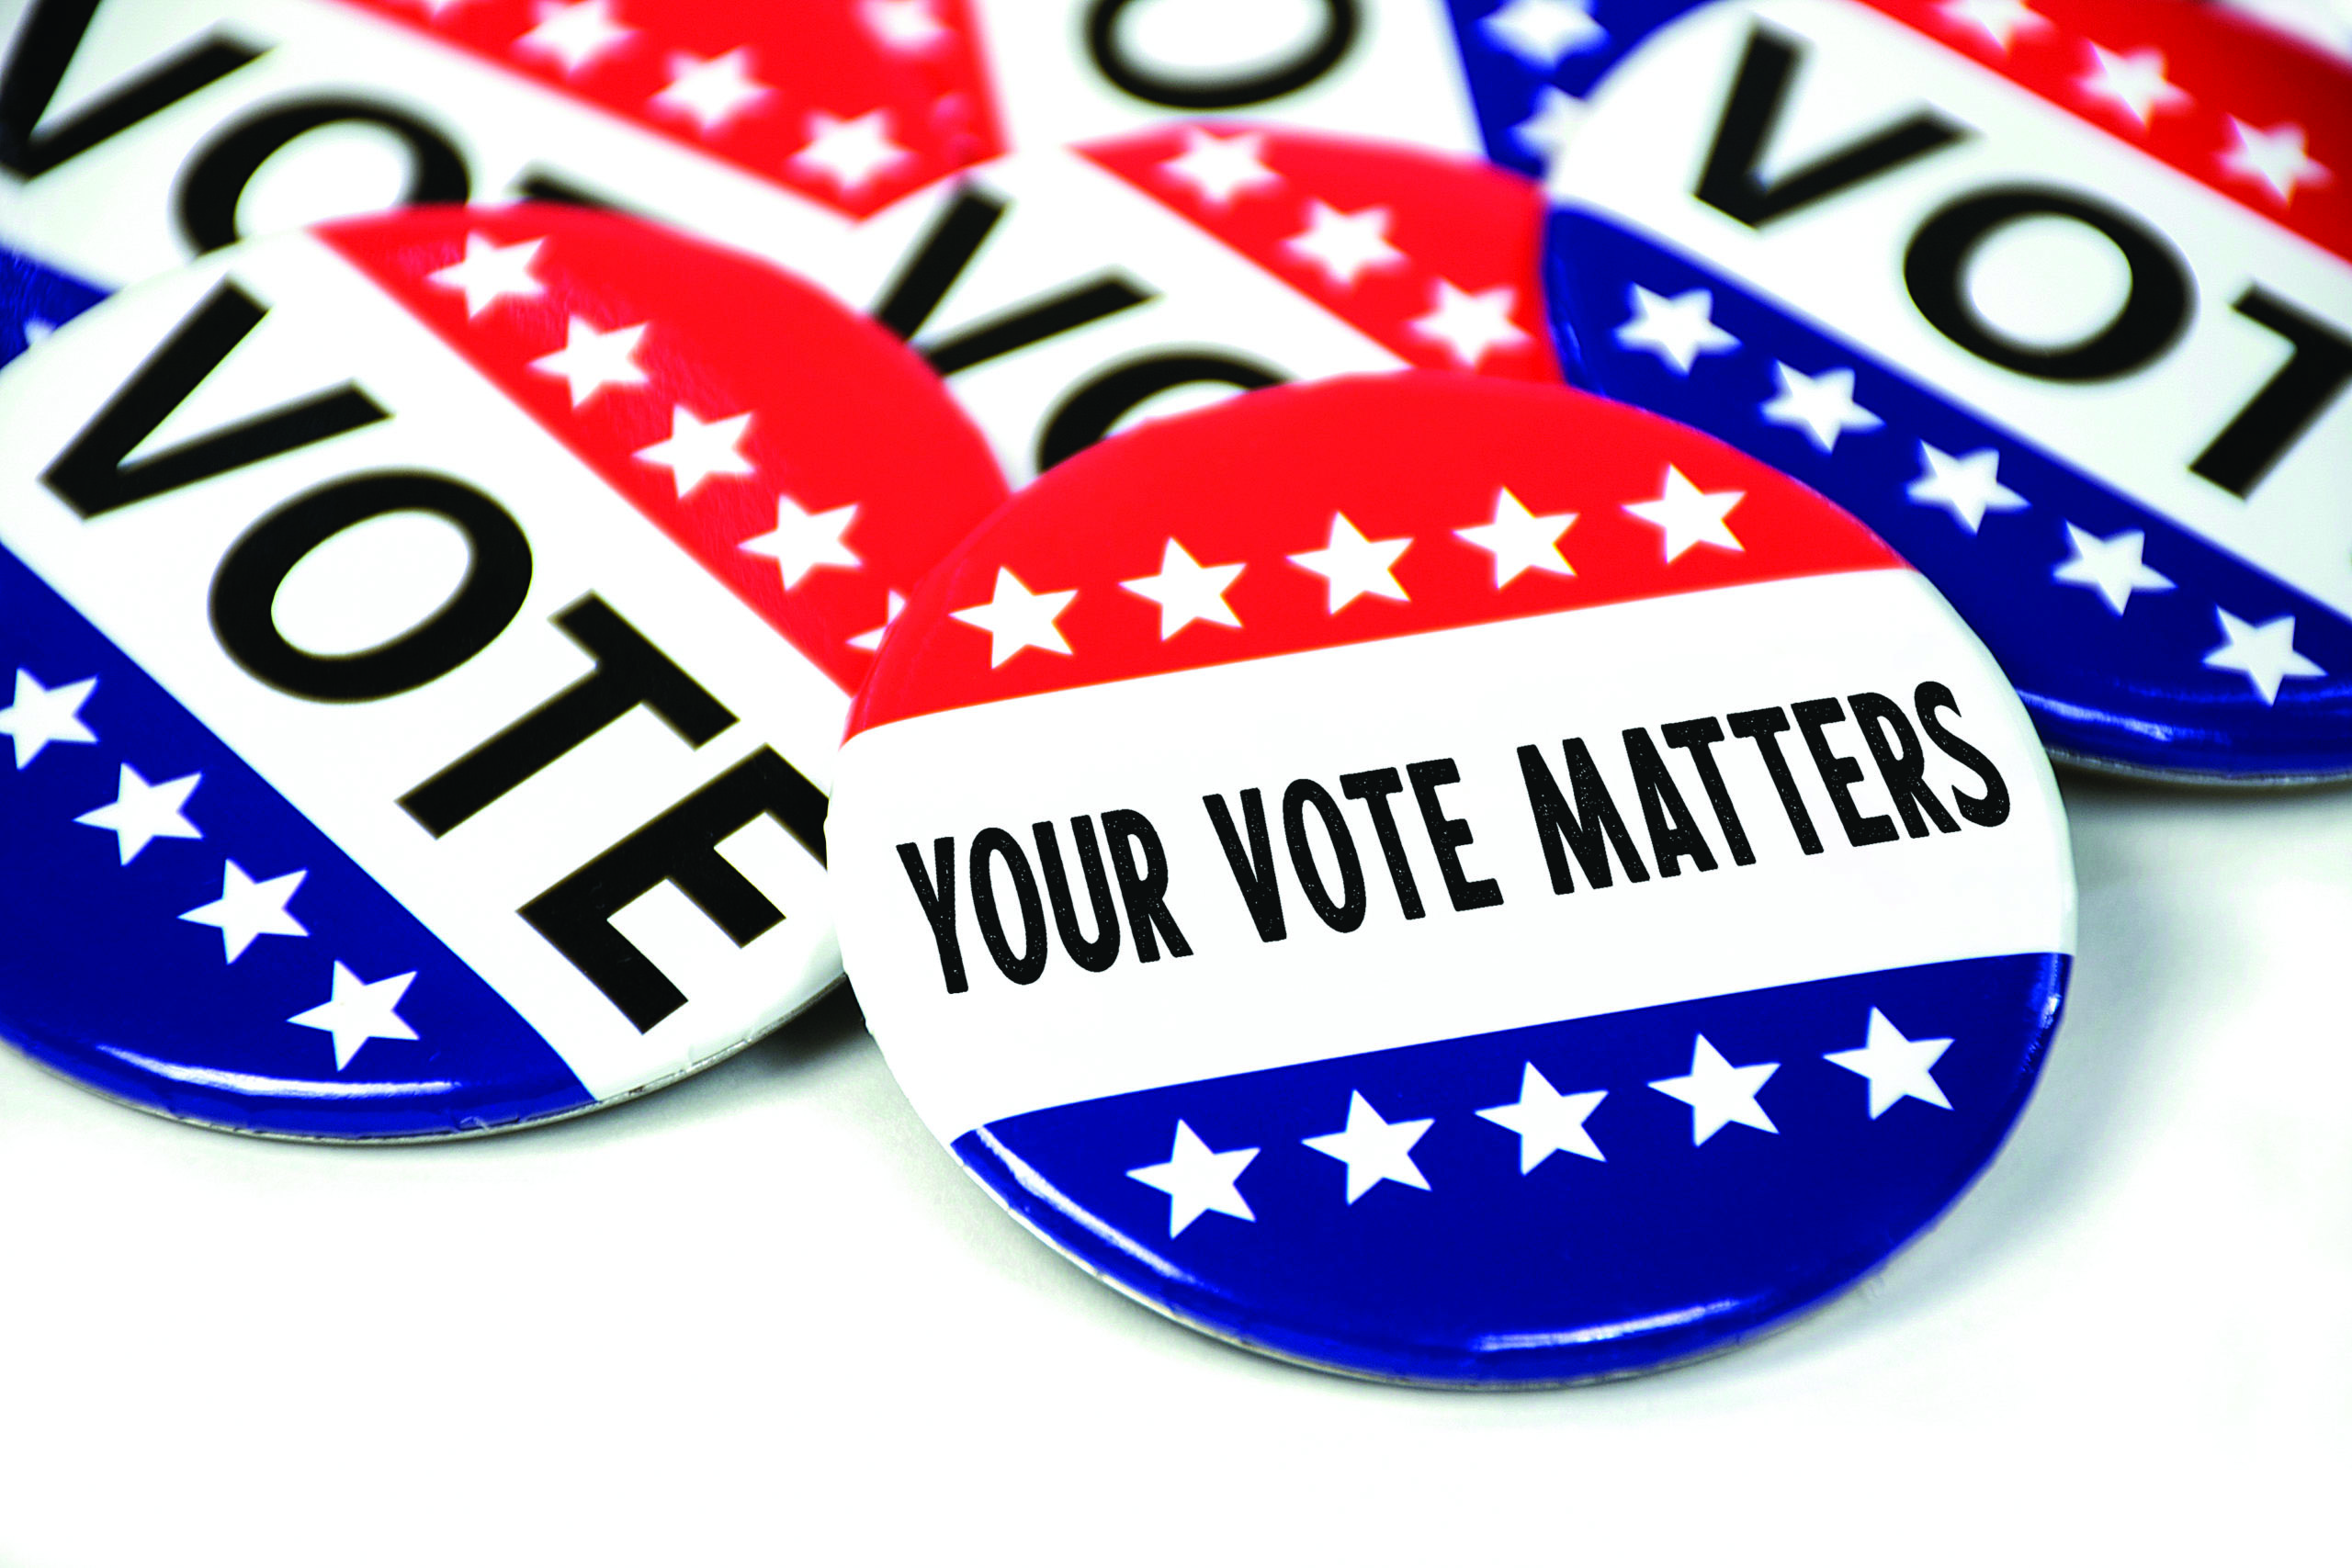 VOTING: It’s the Most American Thing You Can Do, and More of Us Need to Do It!  By Tom Garlock